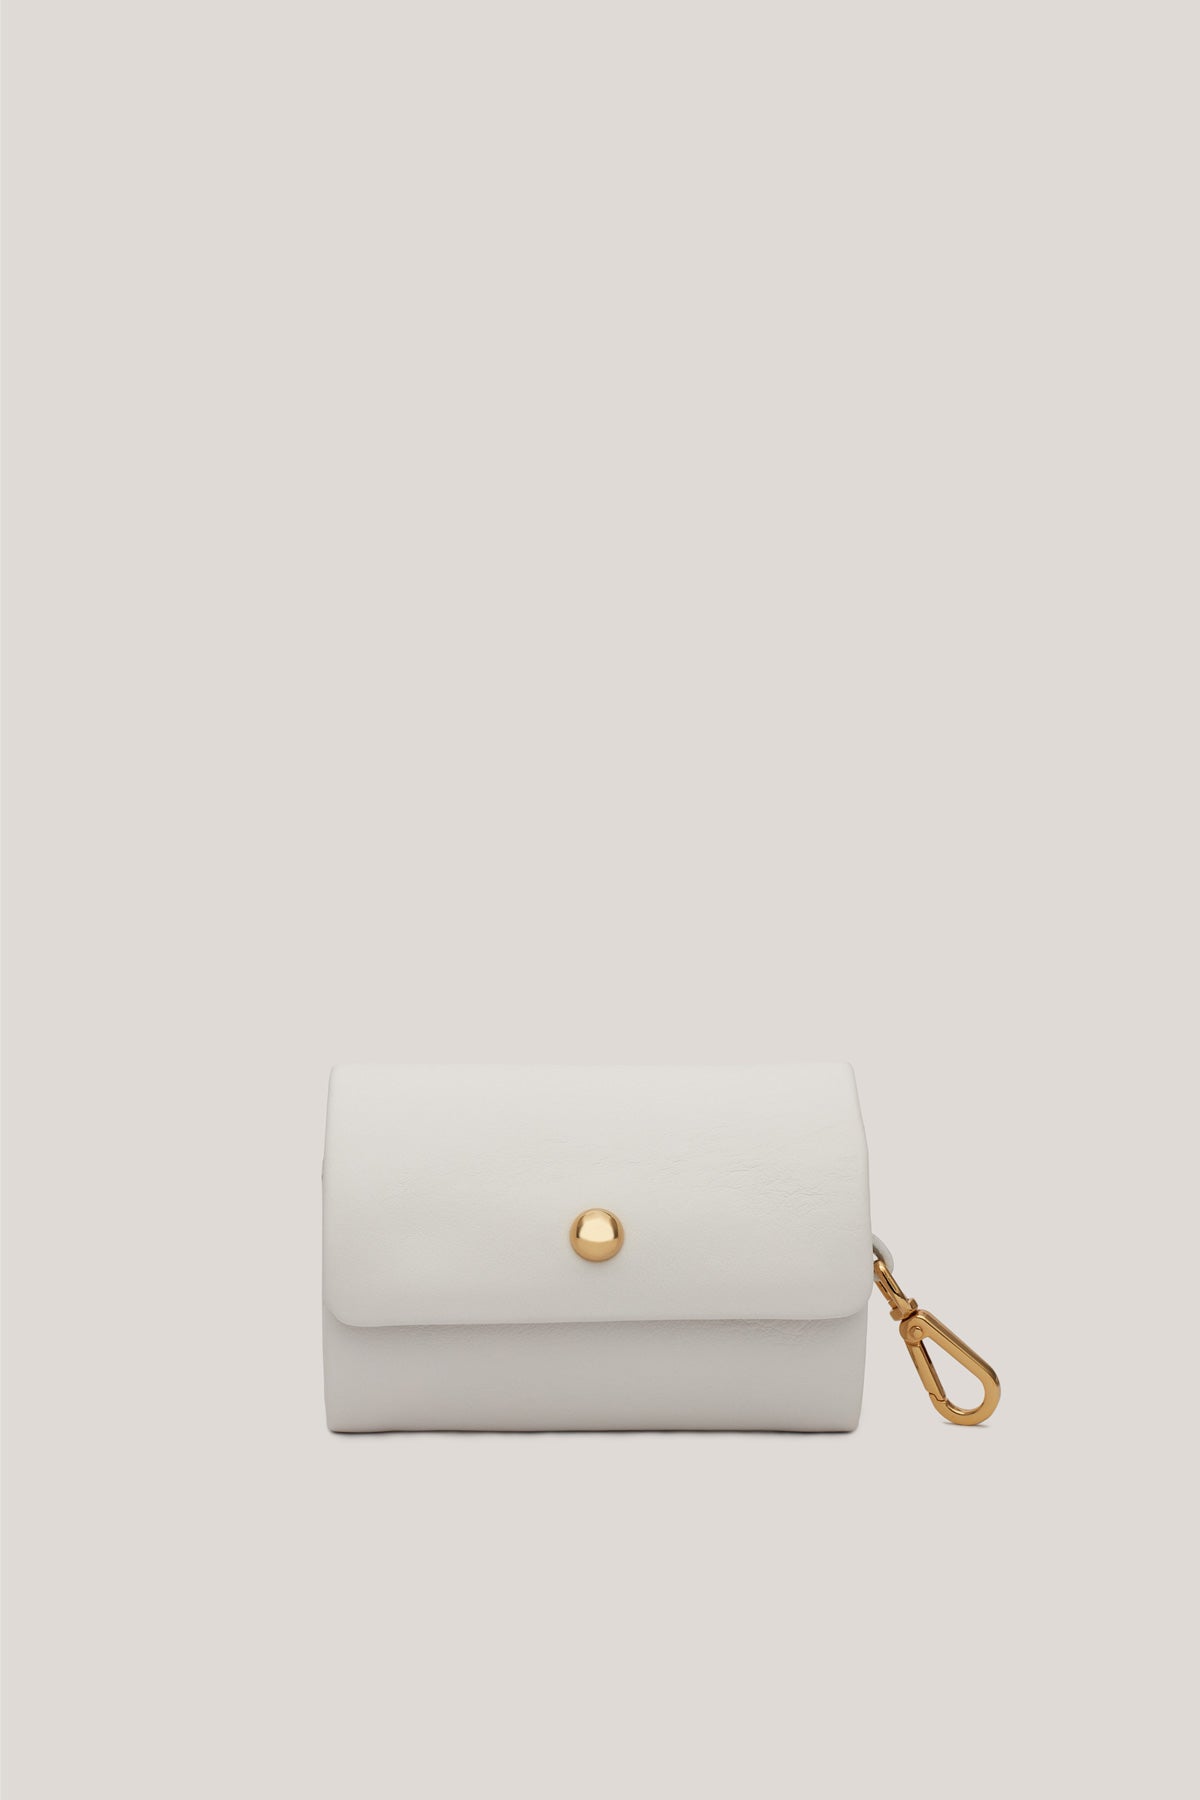 A white elegant coin purse made of quality and luxurious leather